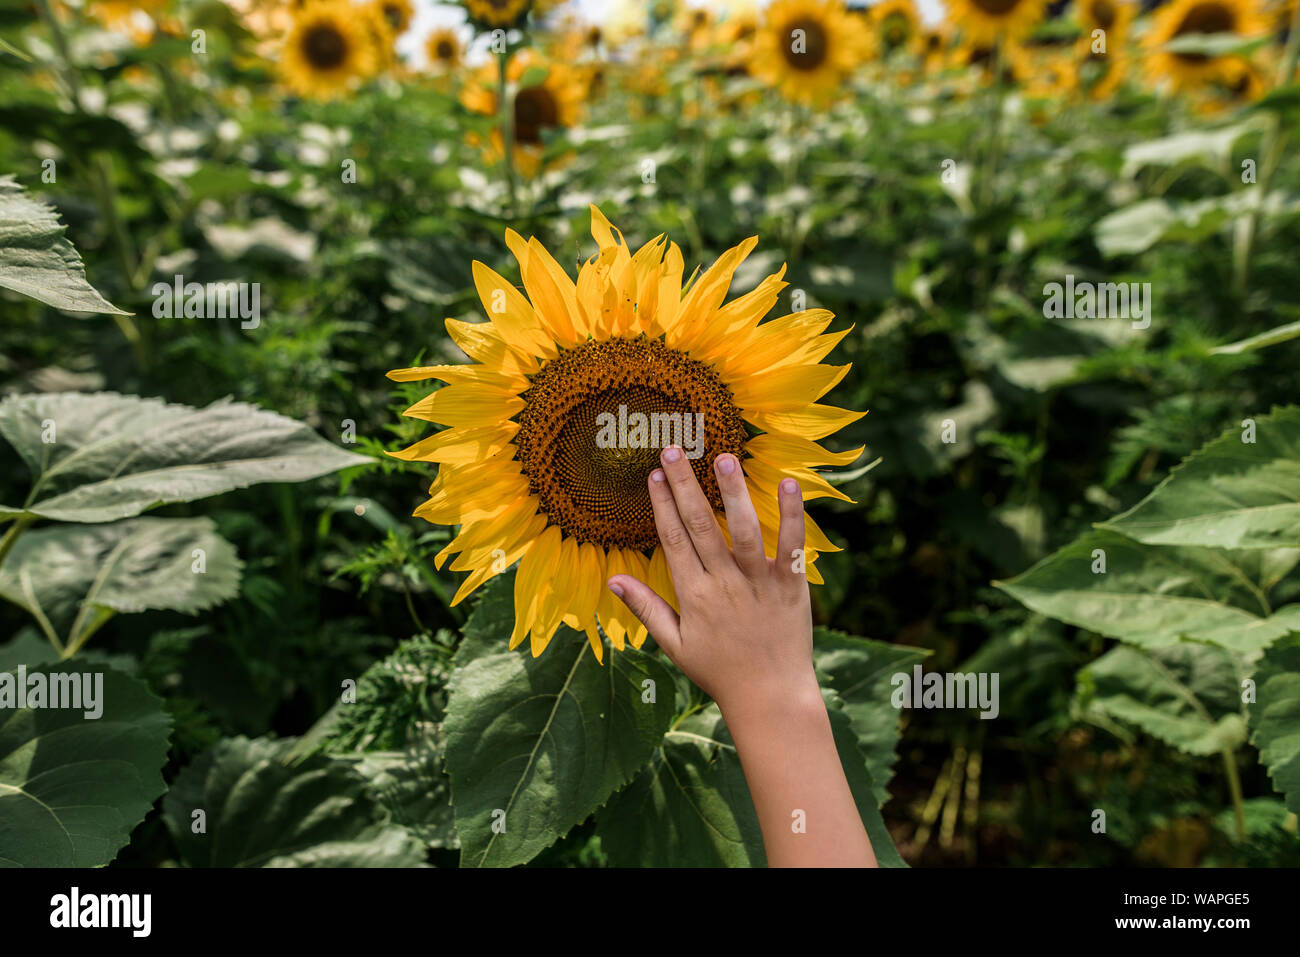 close up of a child's hand reaching up to touch a sunflower Stock Photo